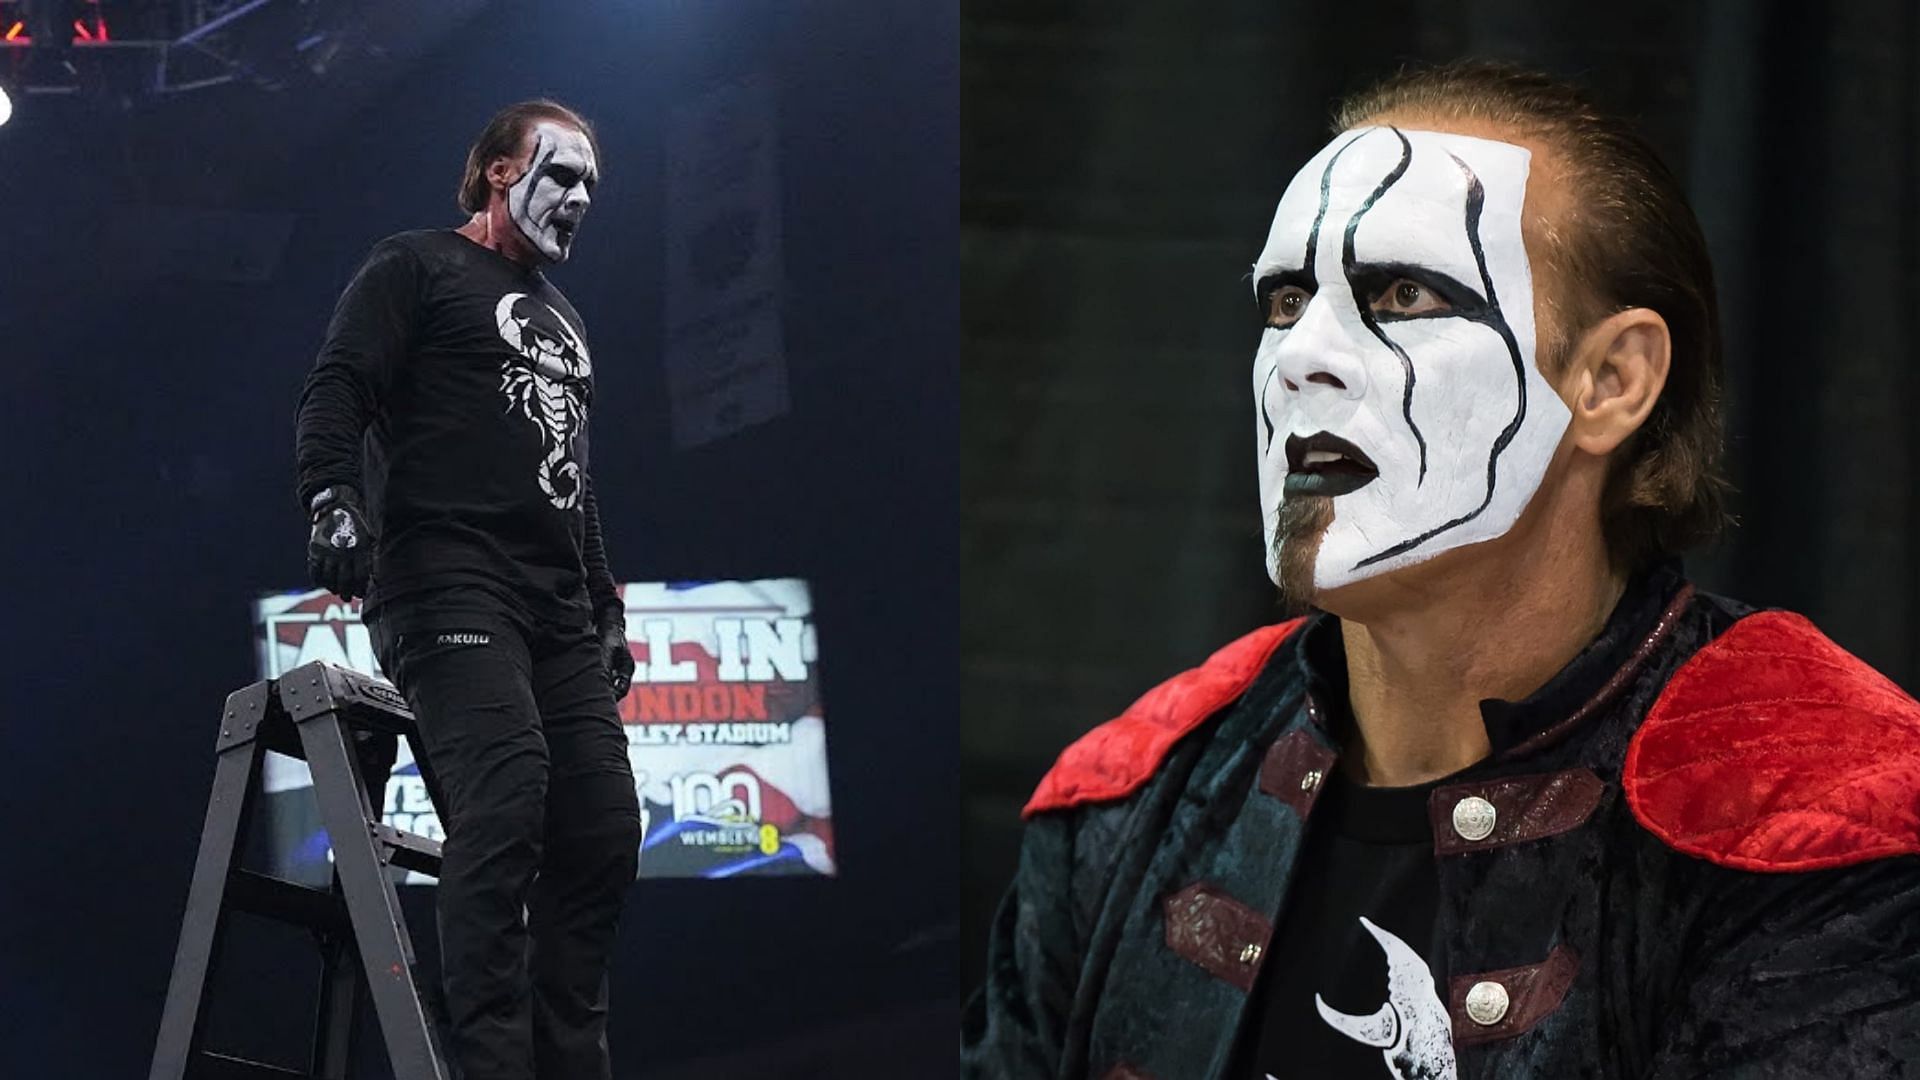 Sting has received a lot of criticism for his recent stunt.